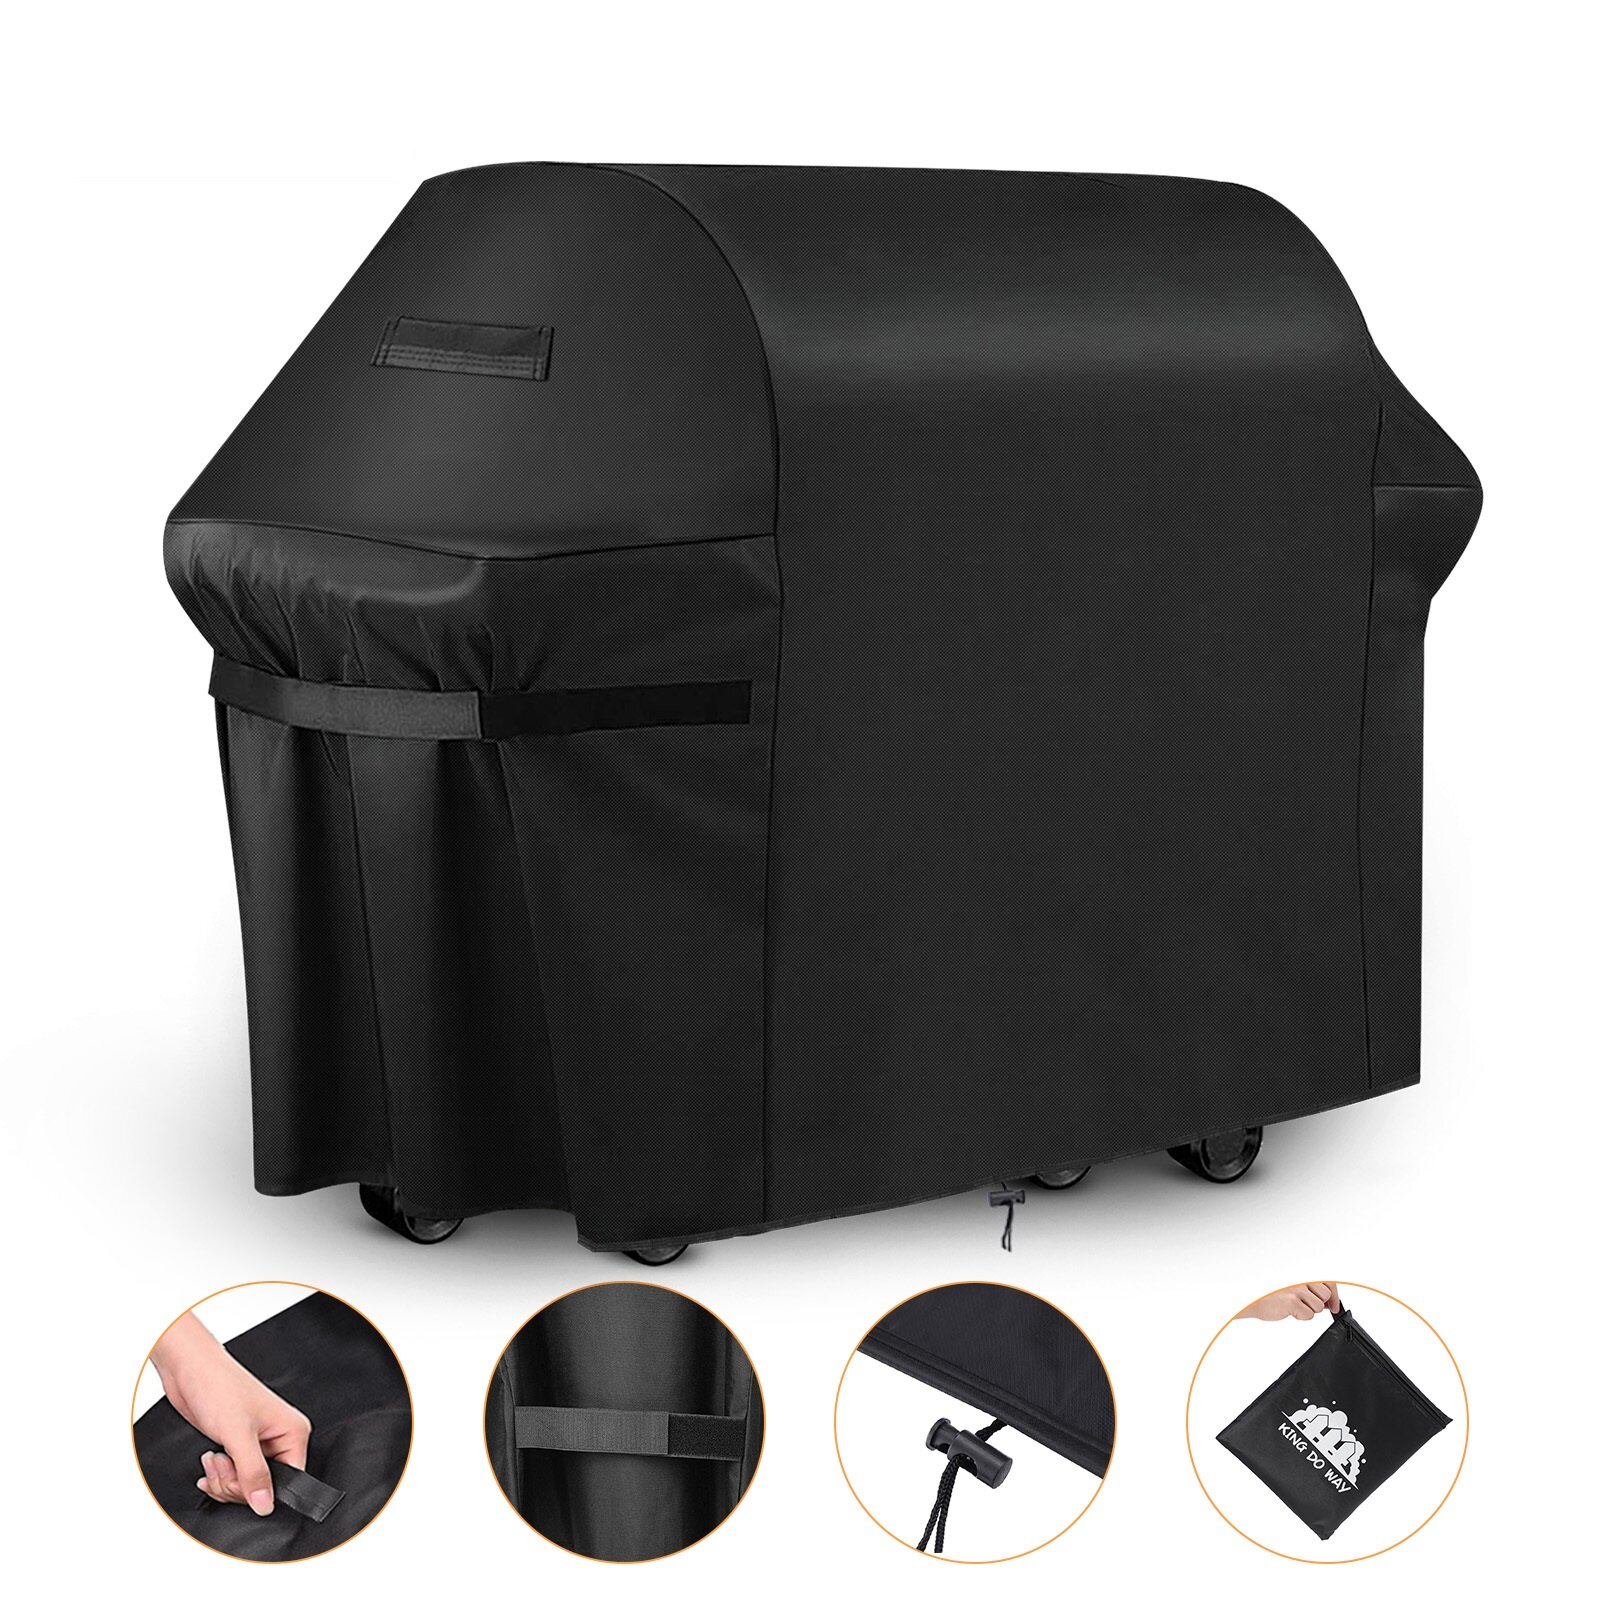 KING DO WAY 210D Oxford Black BBQ Cover Waterdicht Vervagingsweerstand UV-bescherming Grill Cover